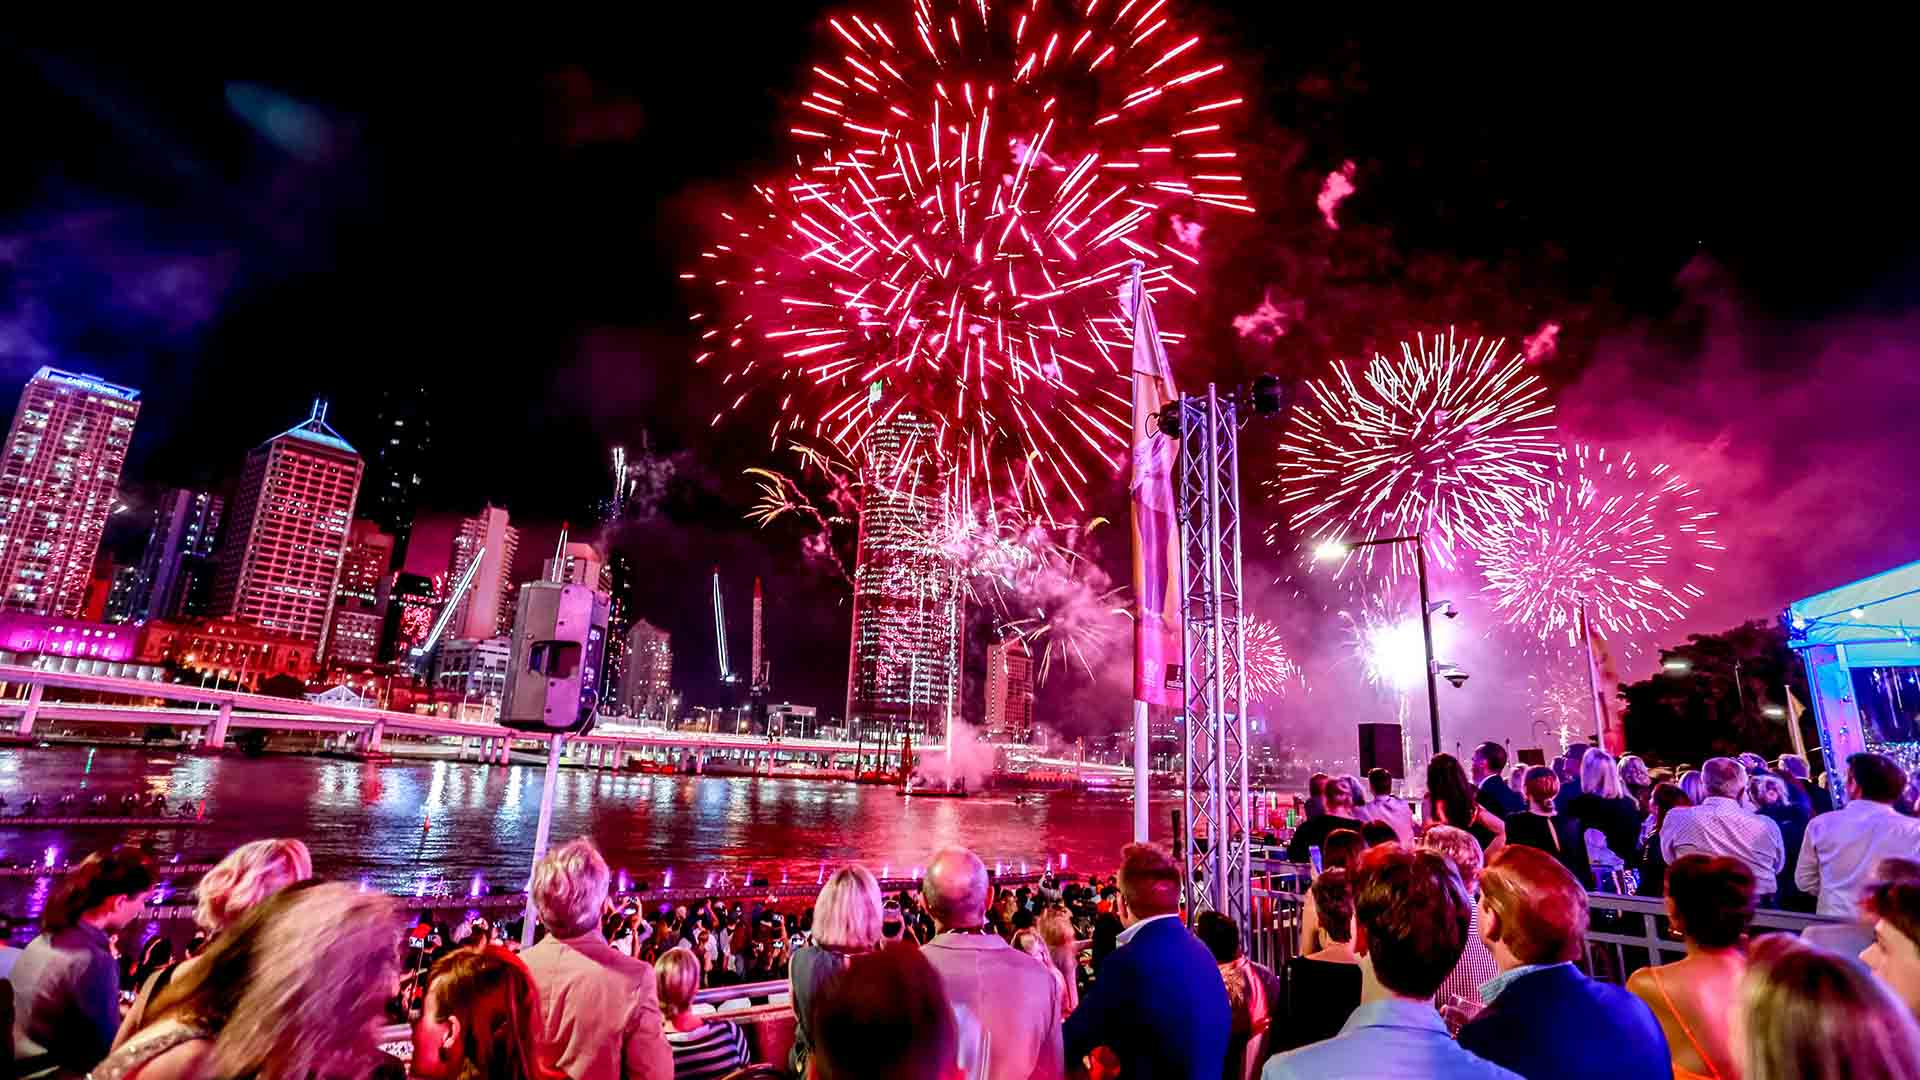 Riverfire Is Returning to Brighten Up Brisbane's Night Sky This September